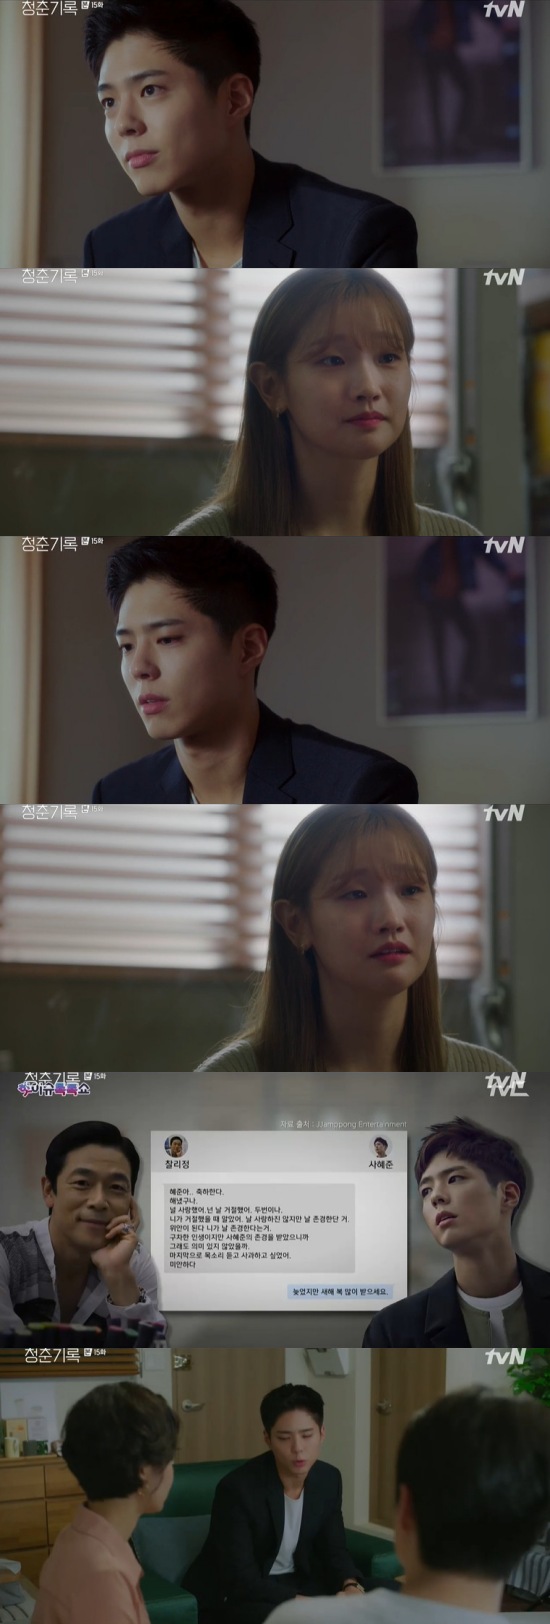 Record of Youth Park Bo-gum grabs Park So-damIn the 15th episode of TVNs monthly drama Record of Youth, which was broadcast on the 26th, Sa Hye-joon (Park Bo-gum) was shown not to accept Park So-dams farewell notice.I asked Lee Min-jae, who was stable on the day, and met with Sa Hye-joon at his agencys office.Sa Hye-joon wondered, Why? And said, Do you remember saying that you will never say sorry if you love me? Do you know how many times you said you were sorry when you met me?Sa Hye-joon said, Im sorry, and he said, I do not know why you think its hard for me every time you say that.I know that Sa Hye-joon is a person who keeps what he said. I will not do it anymore. I will go back to my daily life before I love you, he said.Lee Min-jae (Shin Dong-mi) also released the last text message of Charlie Justice without the consent of Sa Hye-joon. Lee Min-jae later visited Sa Hye-joon and said, I crashed.I know you will not let me tell you in advance. However, netizens accused Sa Hye-joon of using Charlie Chung for his image. Sa Hye-joon told Lee Min-jae, If you break and refute, it will not be arranged, but other controversy.Thats why I asked him to wait, he said.I thought these Choices were the best, were still in the pre-resignation period, Ill accept whatever Choices youre doing, Lee Min-jae said.In particular, Sa Hye-joon missed the stable and was enthusiastic. In the end, Sa Hye-joon waited for the stable in front of the store and grabbed him saying, I can not break up with you.Photo = TVN broadcast screen